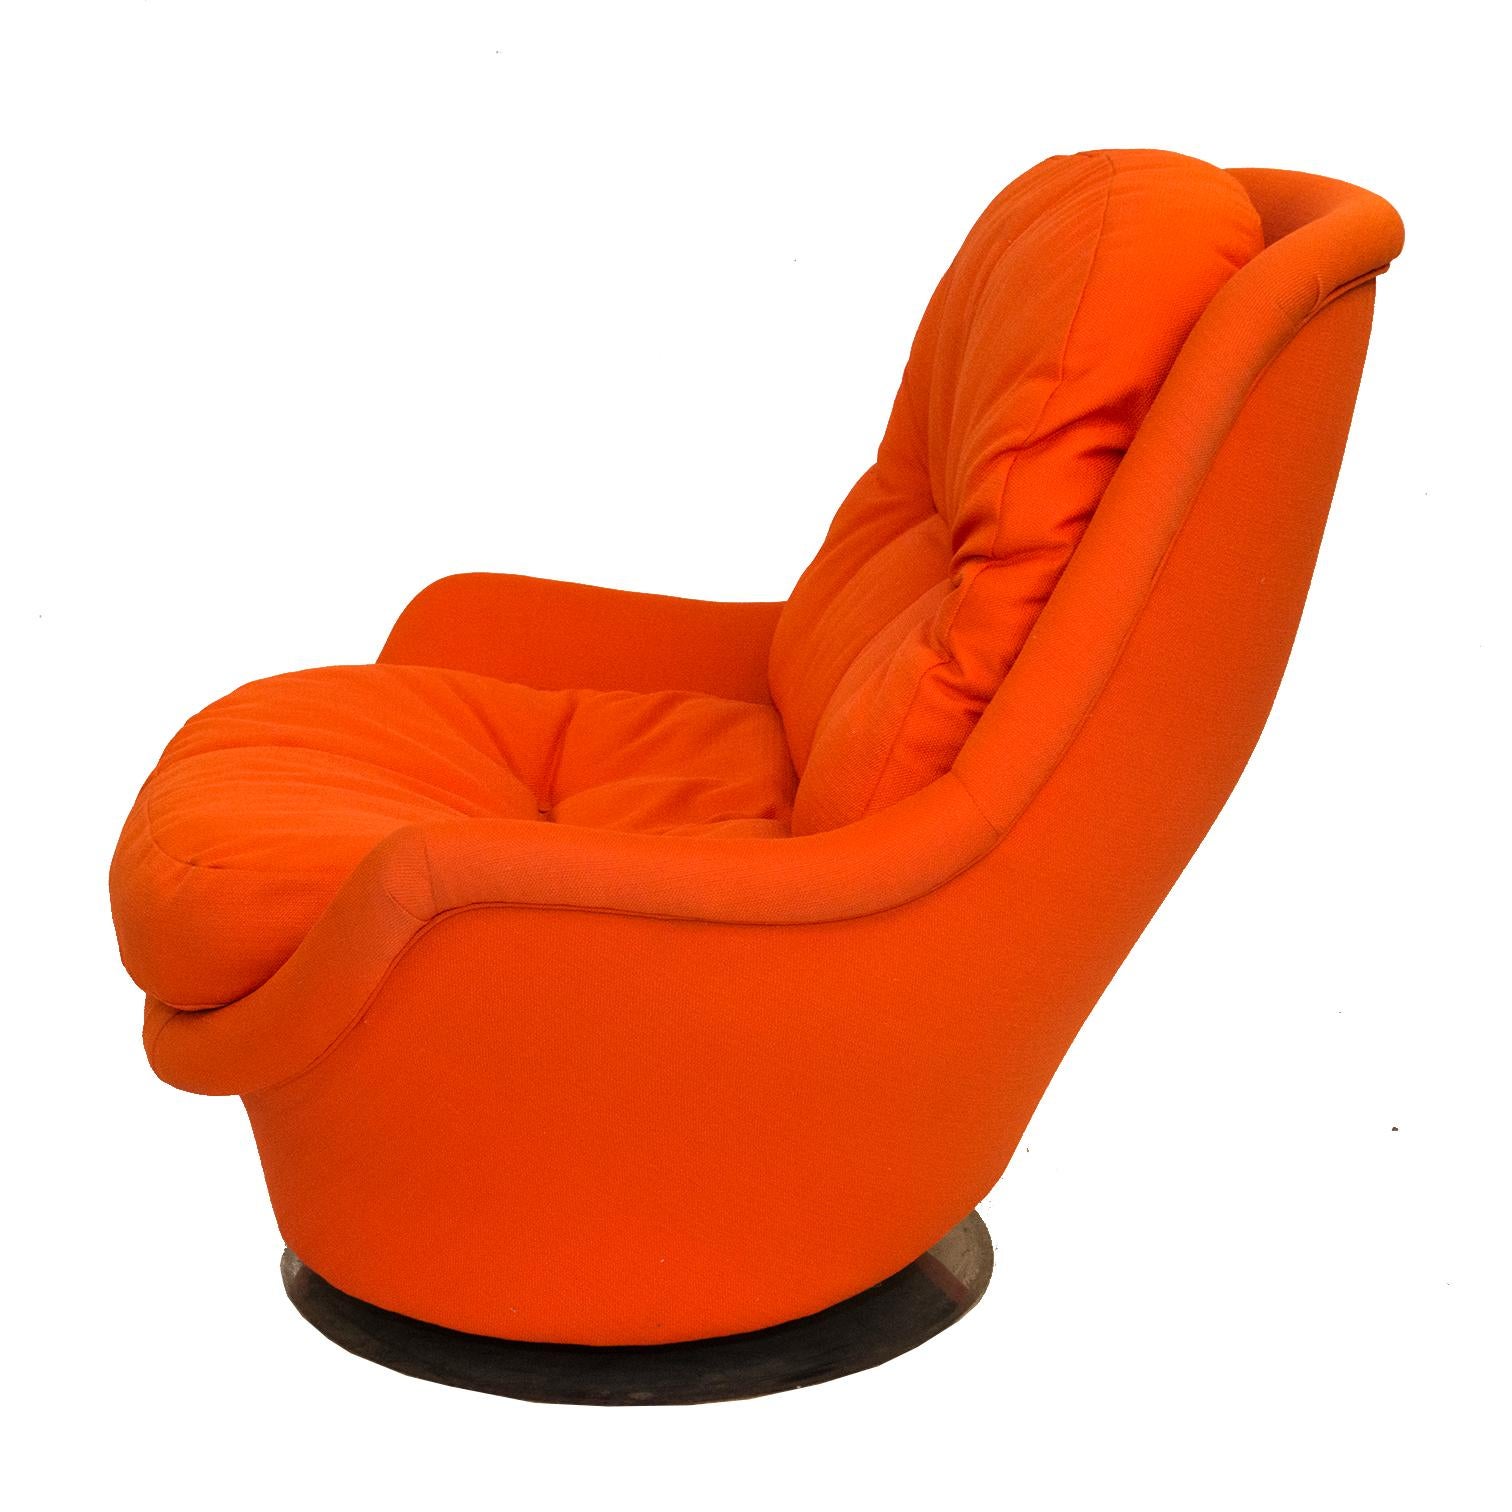 A hard to find swivel rocker by Milo Baughman for Thayer Coggin. Redone in our Connecticut Workshop in a super-fun, daring orange fabric. Club chair tilts and swivels. Extremely comfortable and loads of fun!